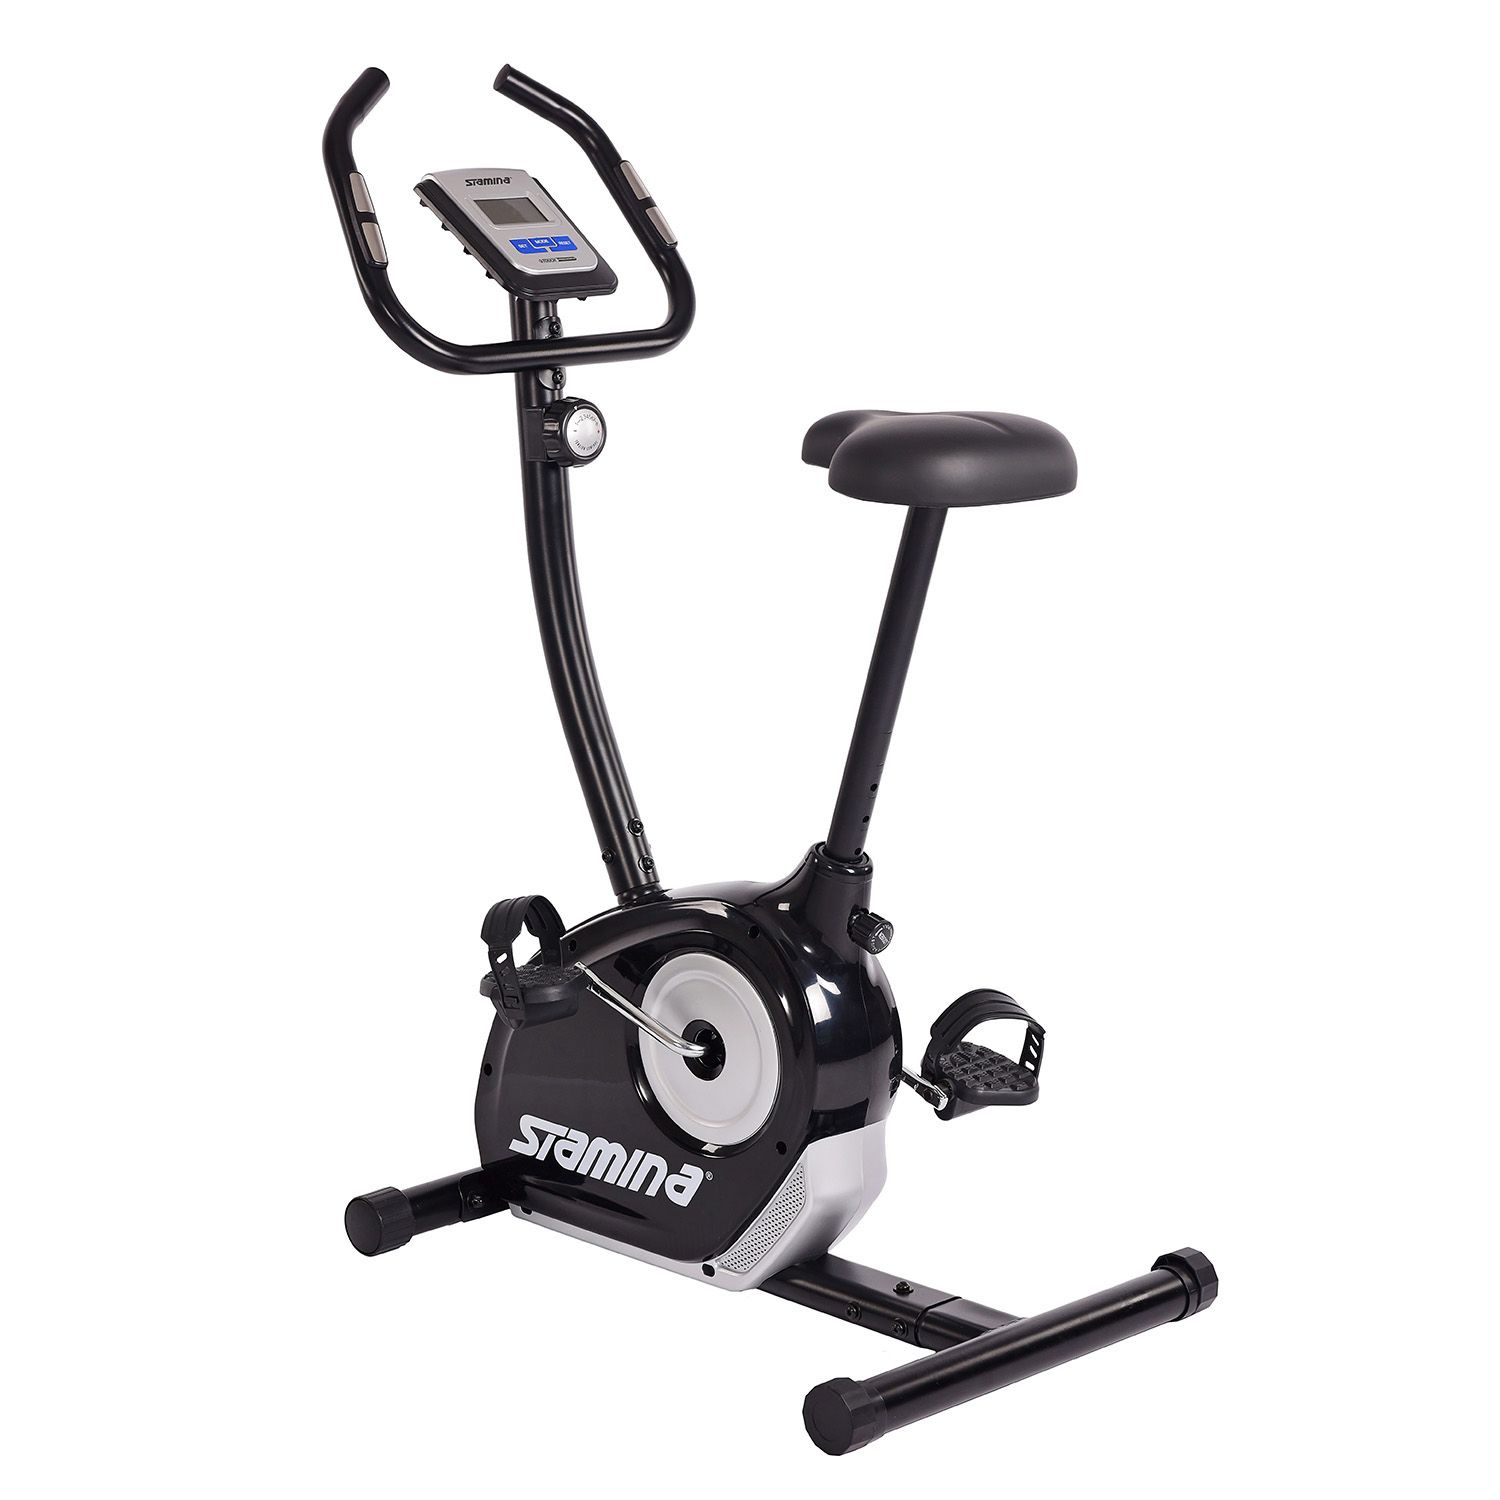 gold's gym cycle trainer 400 ri exercise bike